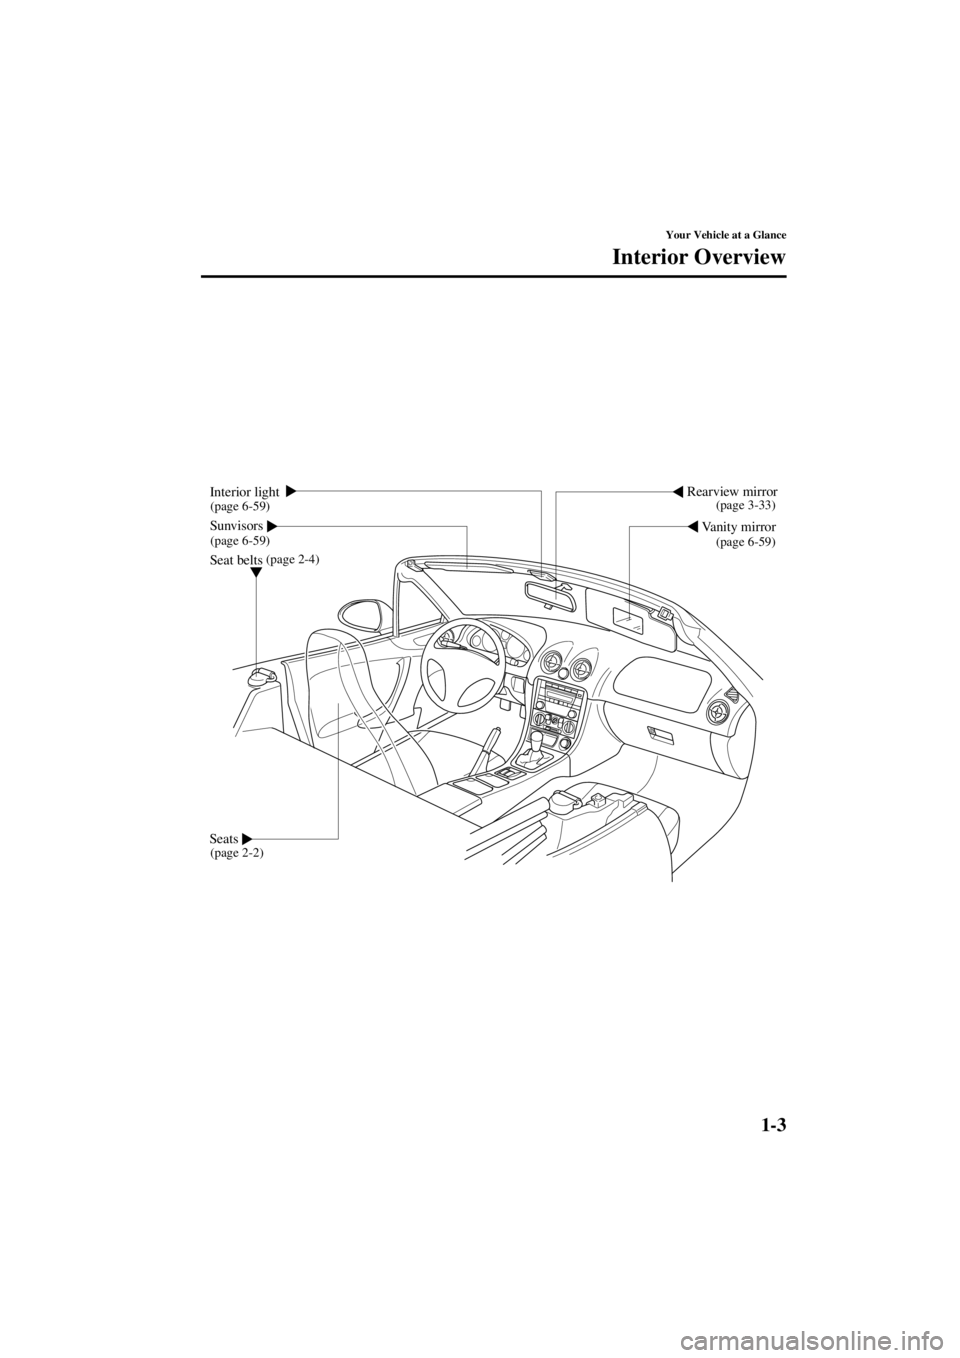 MAZDA MODEL SPEED MX-5 MIATA 2004  Owners Manual 1-3
Your Vehicle at a Glance
Form No. 8T02-EA-03L
Interior Overview
Vanity mirror
Rearview mirror
Seat beltsInterior light
Sunvisors
Seats
(page 6-59)
(page 6-59) (page 2-4)
(page 2-2) (page 6-59) (pa